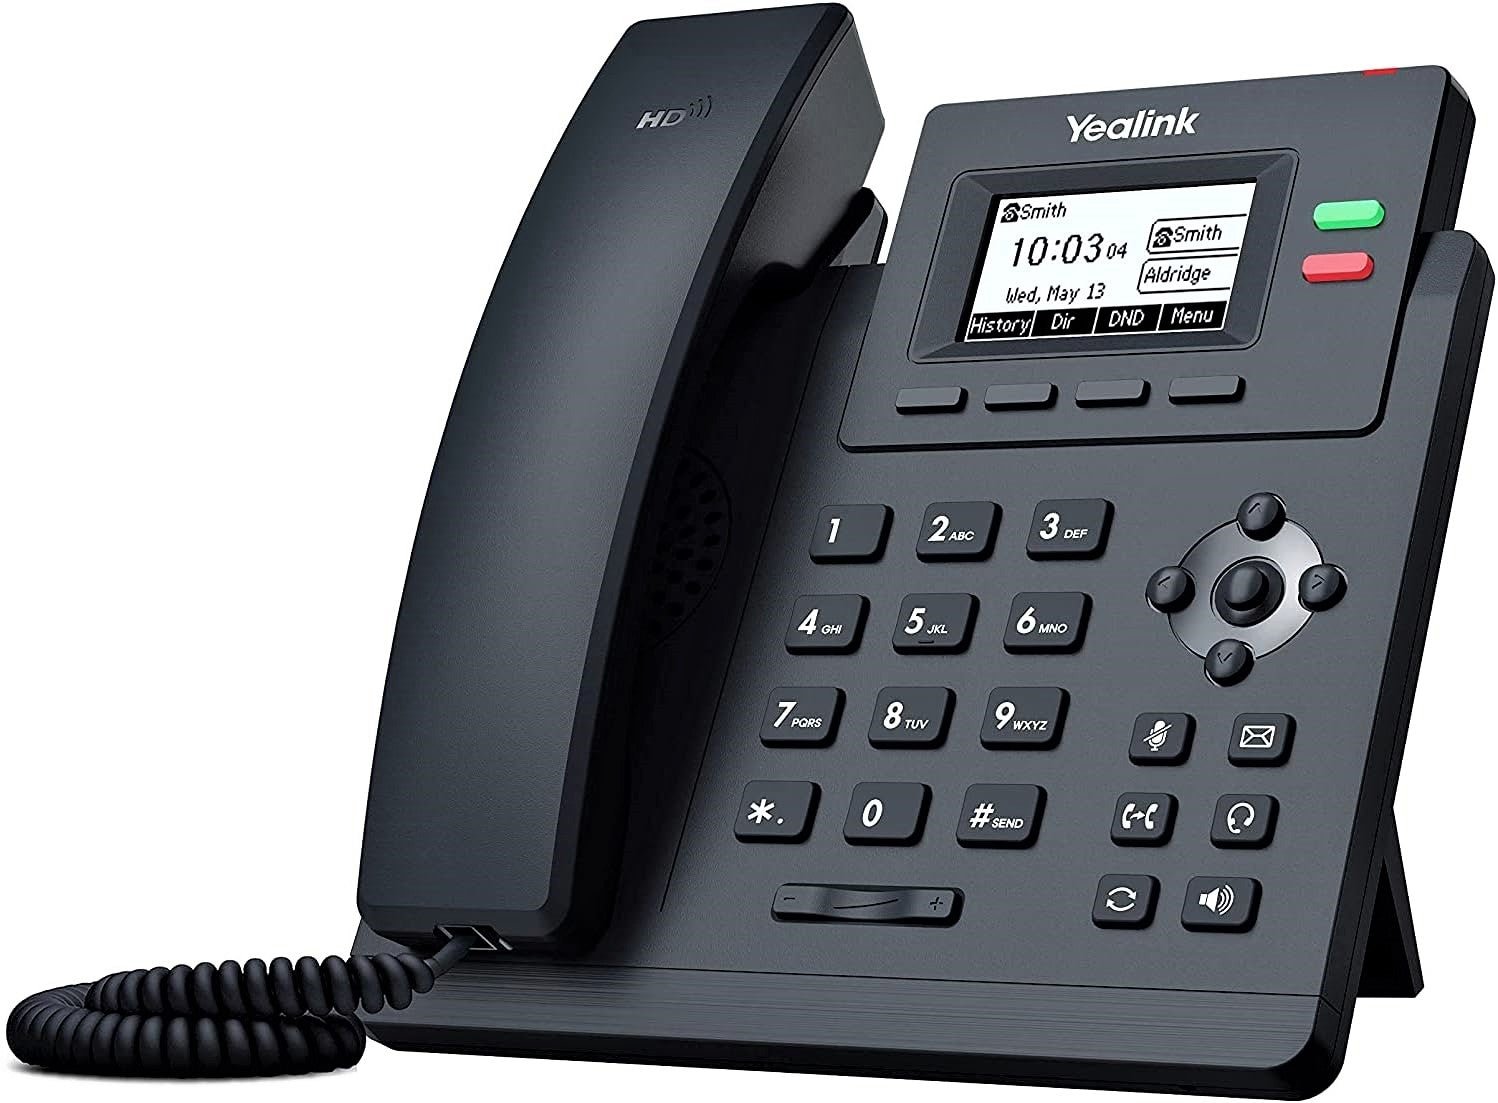 Yealink SIP-T31P Entry-level IP Power over Ethernet Corded Phone with 2 Lines, HD Voice and 2.3 Inch Graphical LCD Display with Backlight (132 x 64 Pixel)